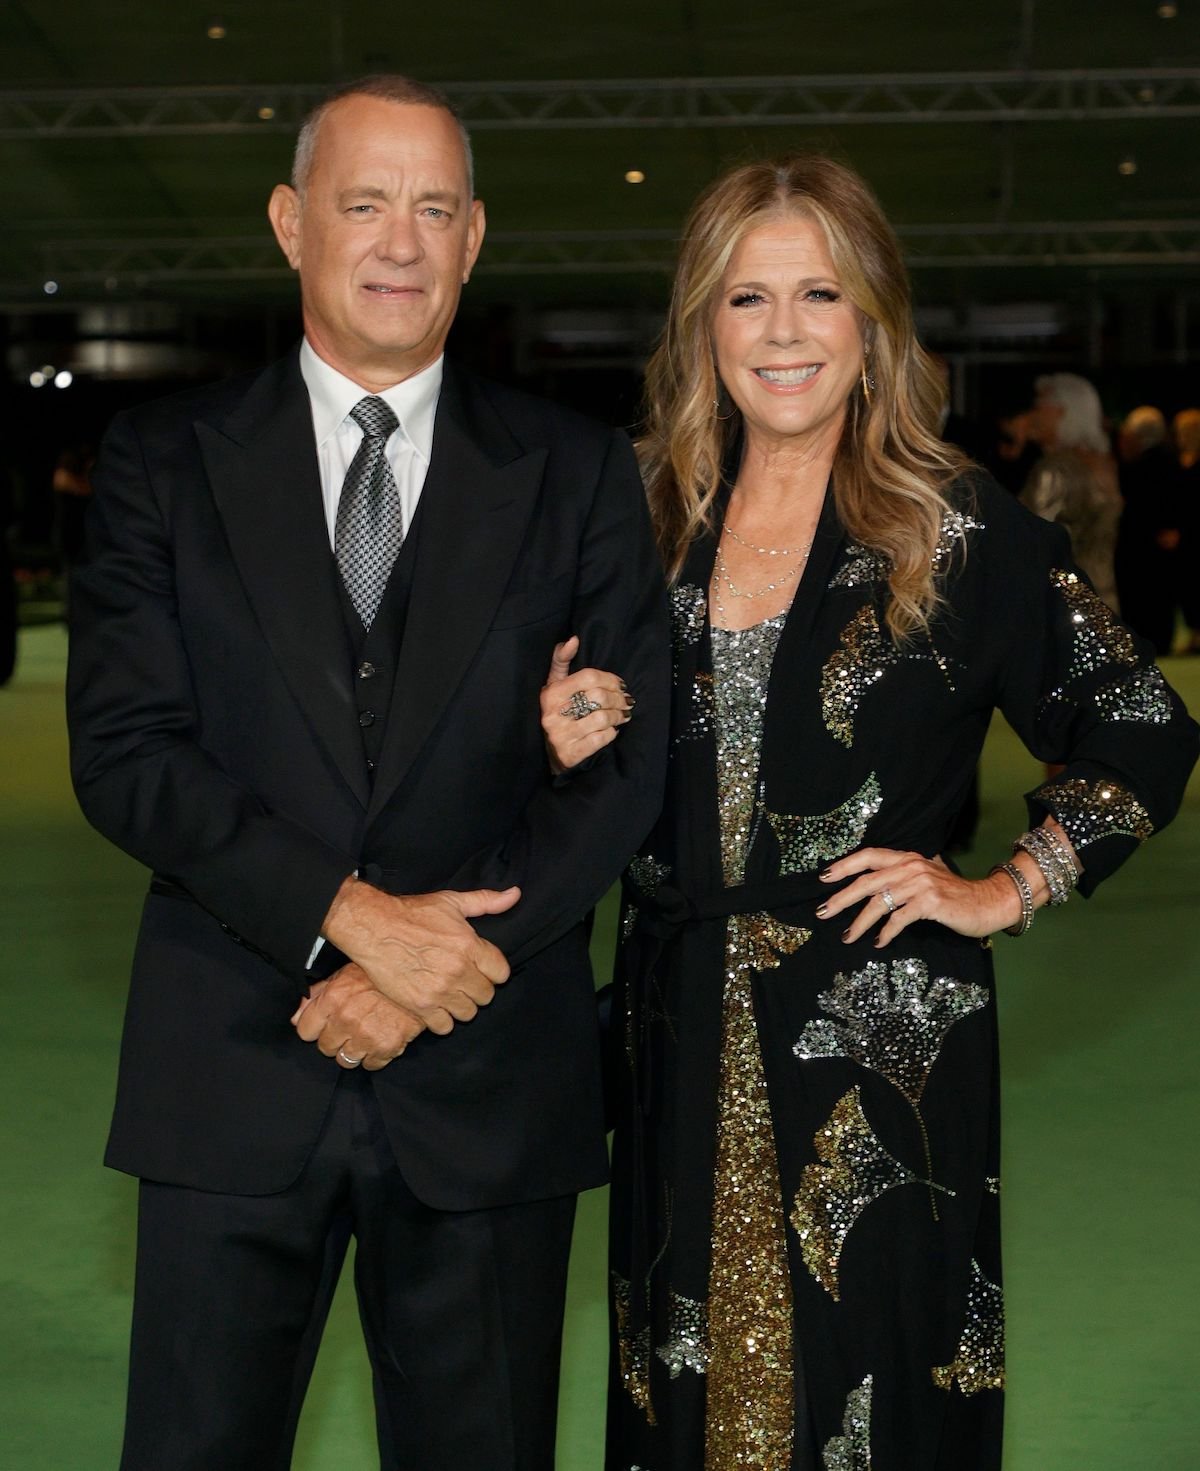 Tom Hanks and Rita Wilson pose together at an event.